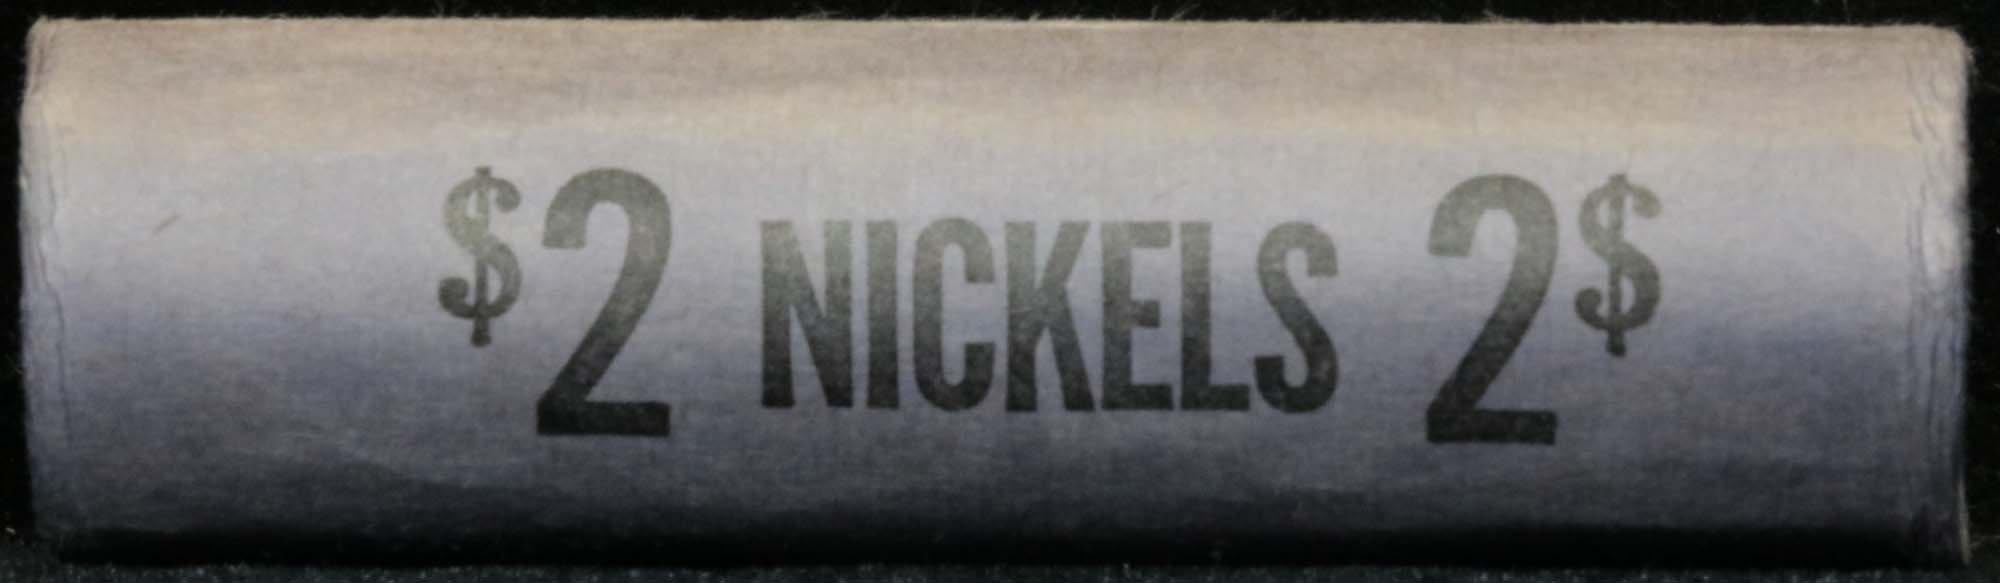 Full roll of Buffalo Nickels, 1924 & 's' Mint Ends Grades circulated